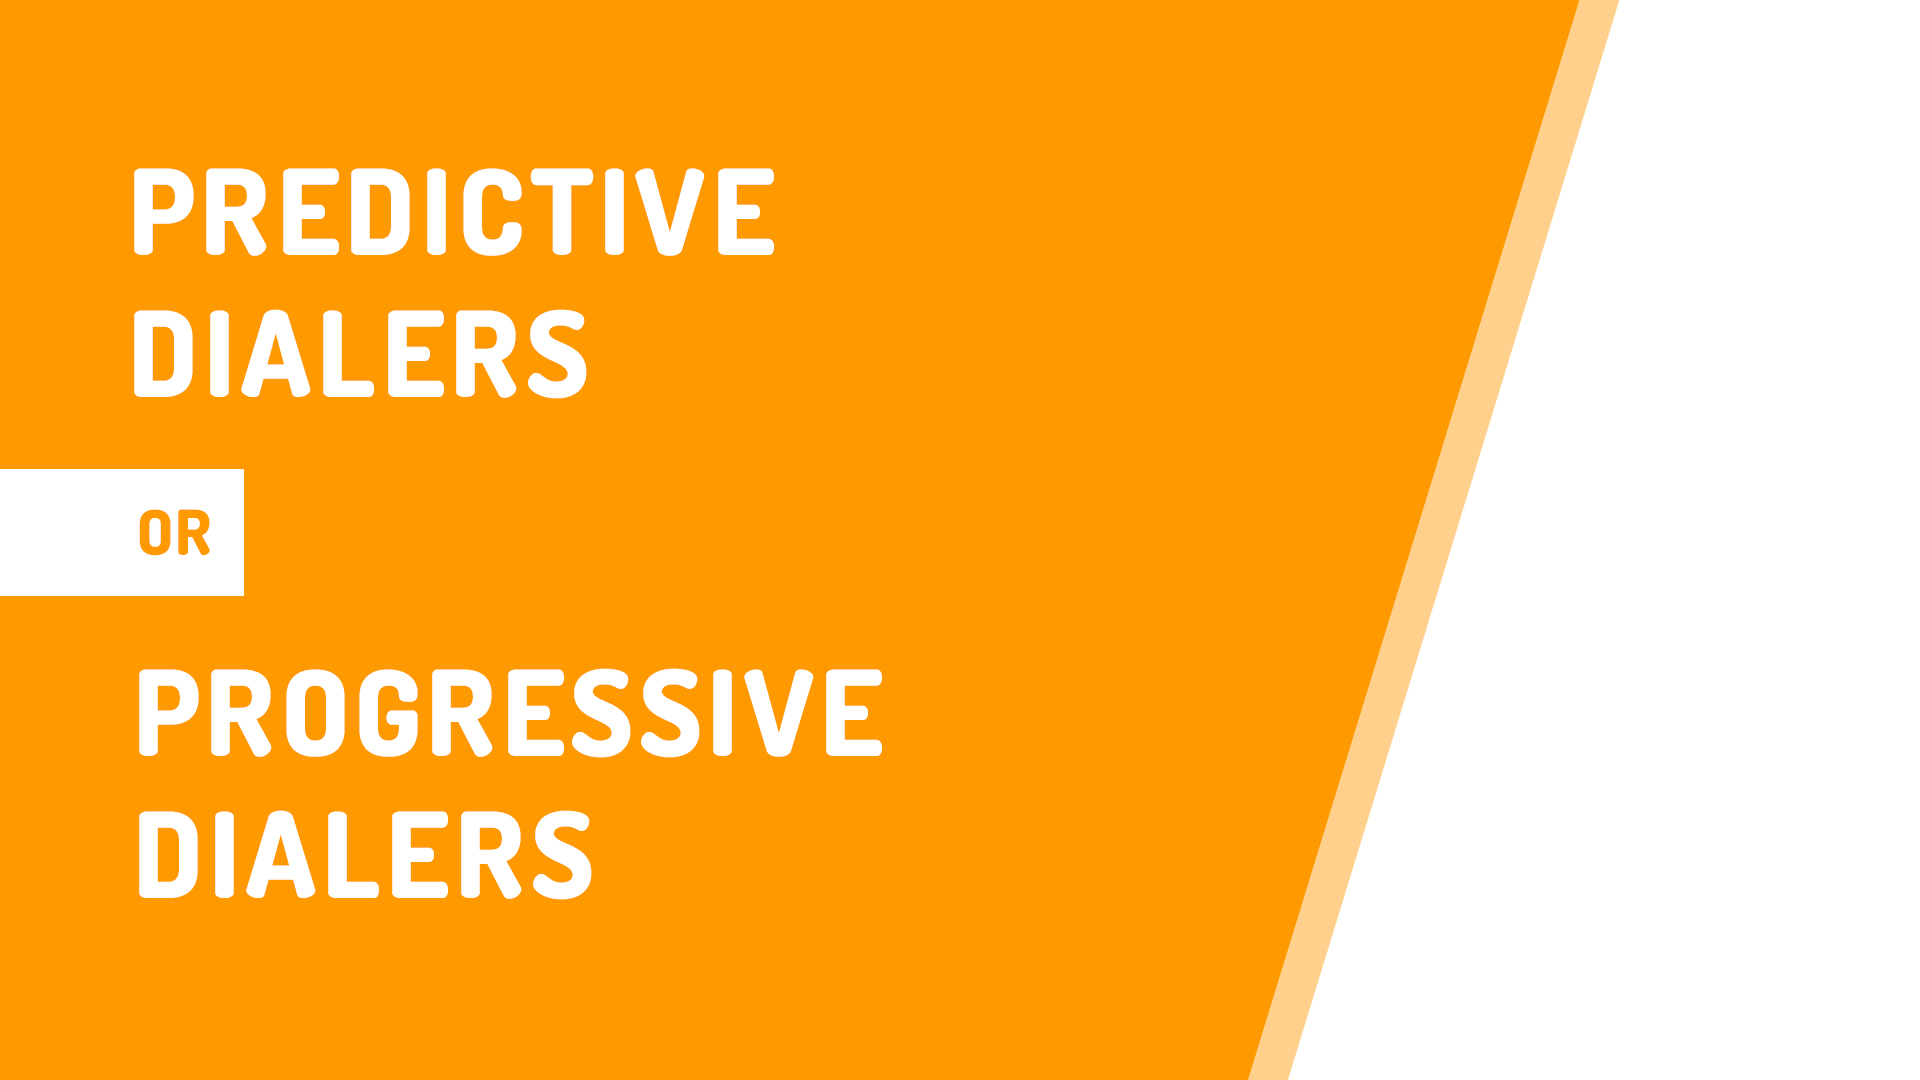 Predictive Dialers or Progressive Dialers - Which is Right for Your Business?